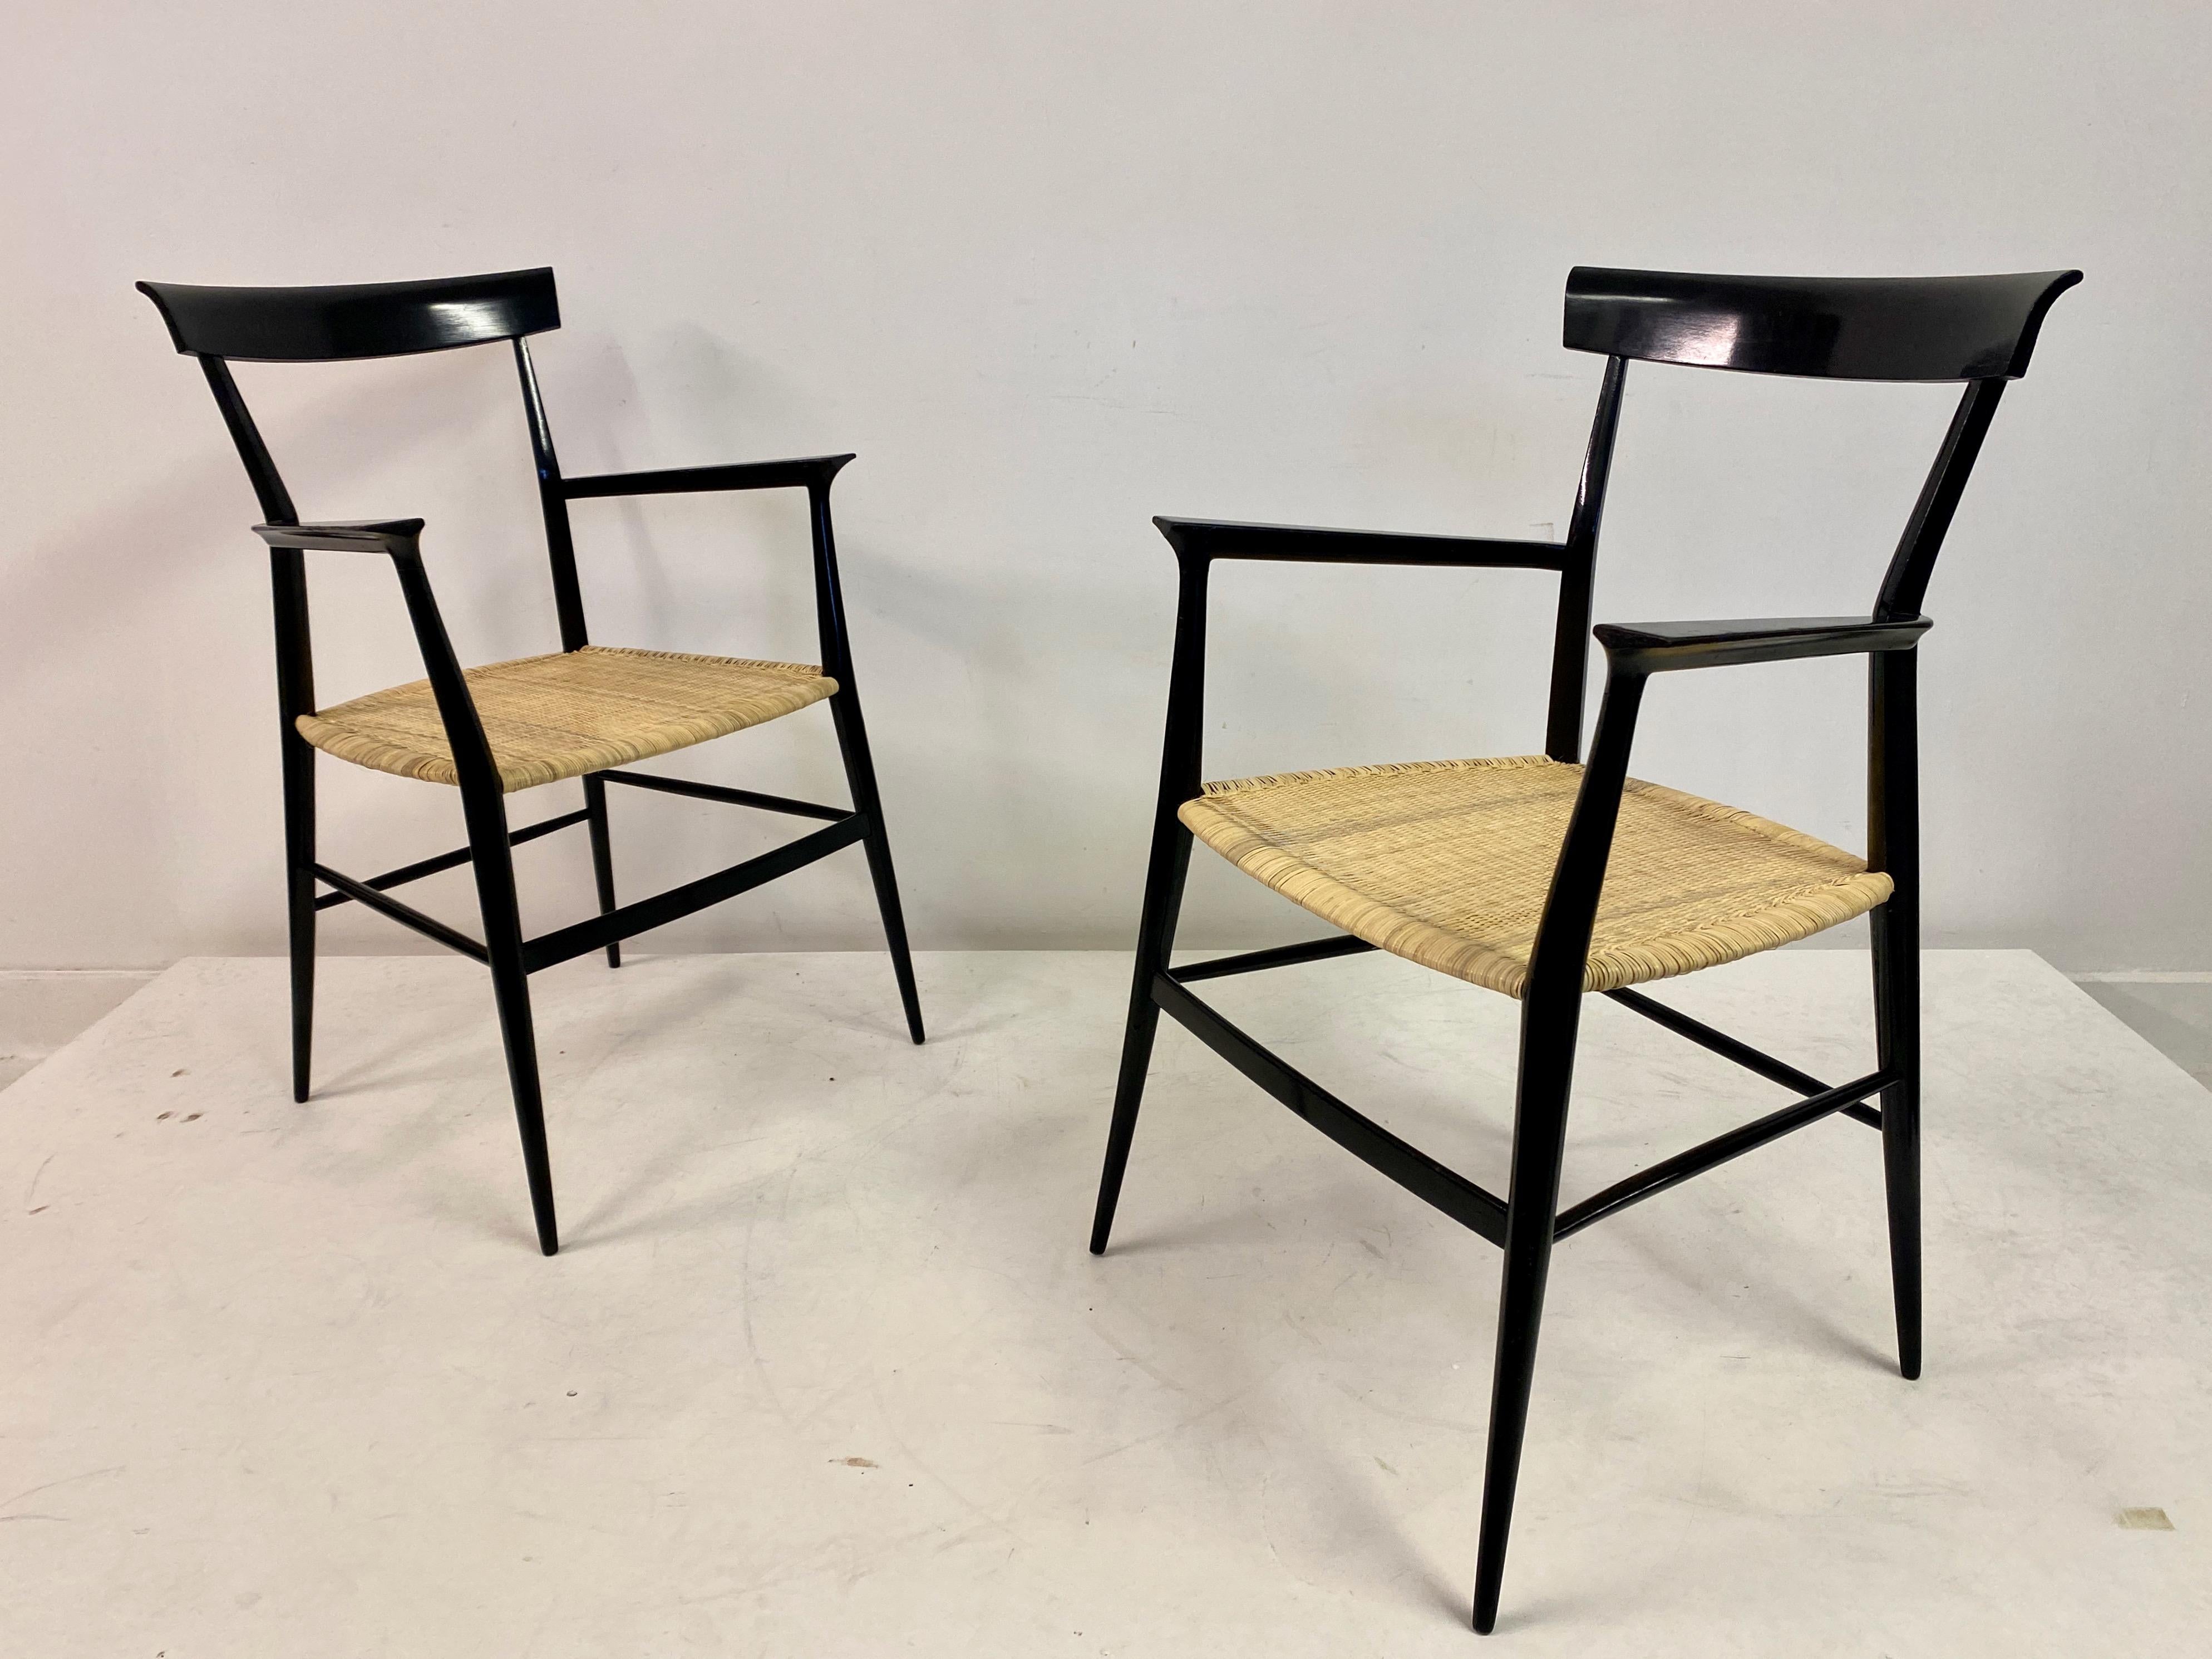 Pair of 1950s Tigullina Chairs by Colombo Sanguineti For Sale 13